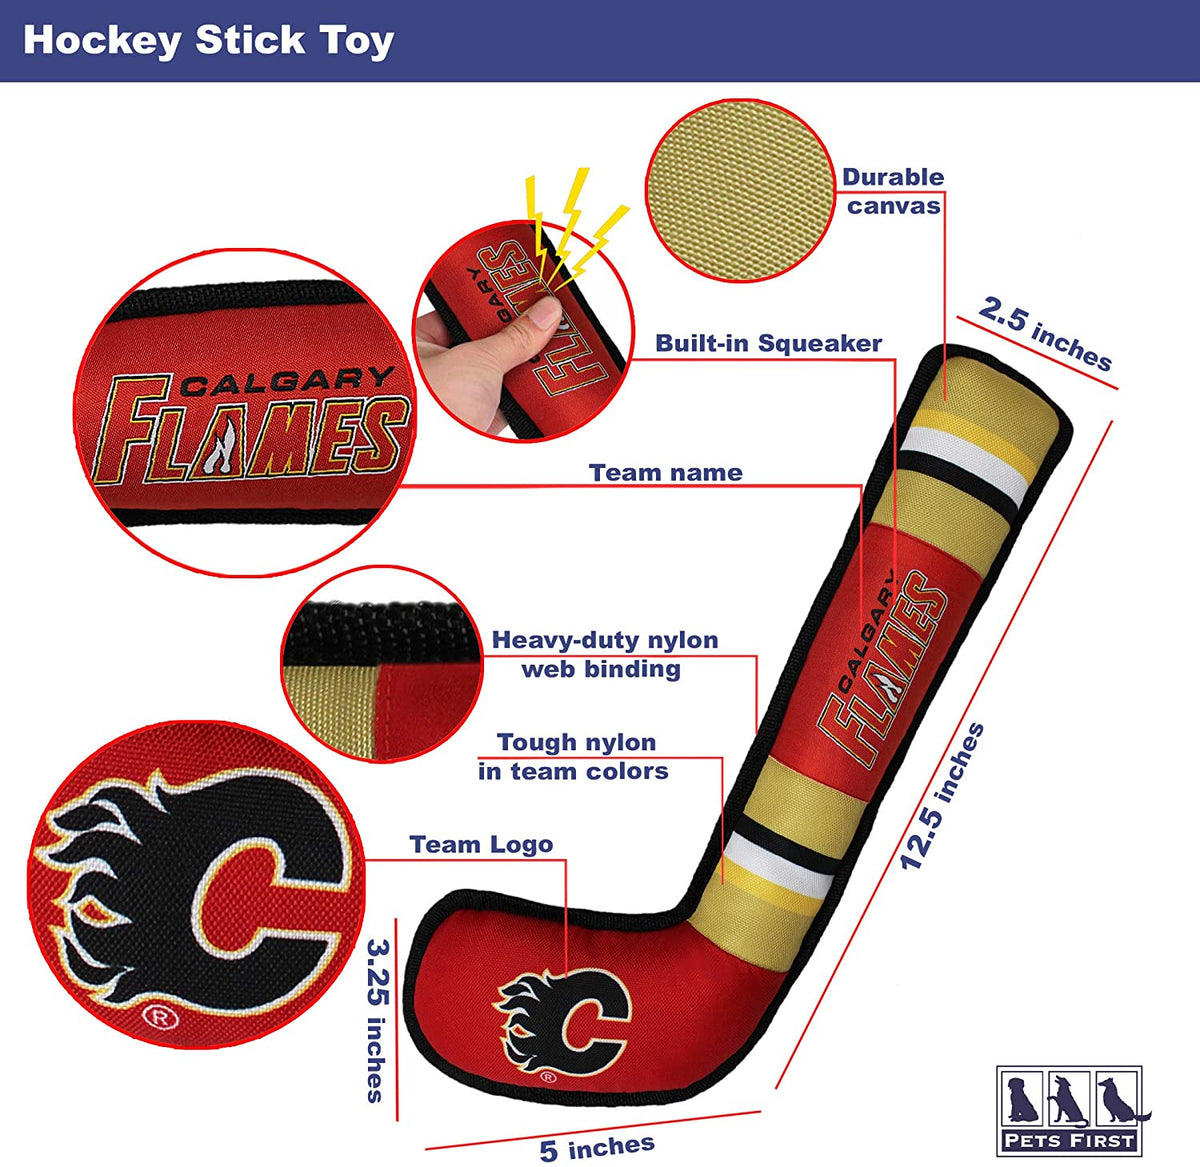 Calgary Flames Hockey Stick Toys - 3 Red Rovers